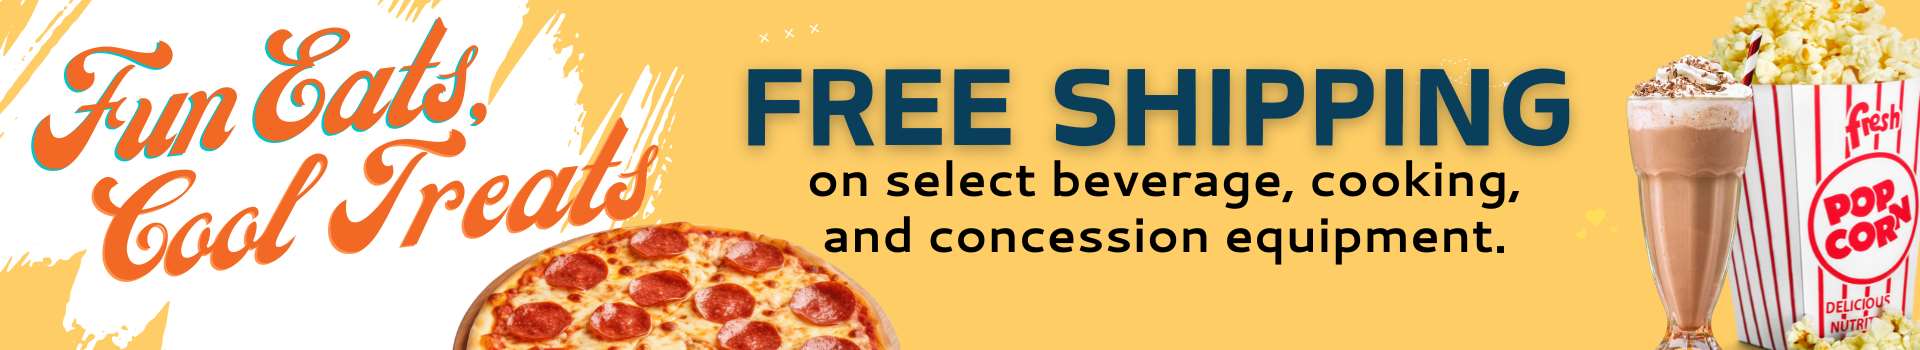 Free Shipping on select concession and beverage equipment